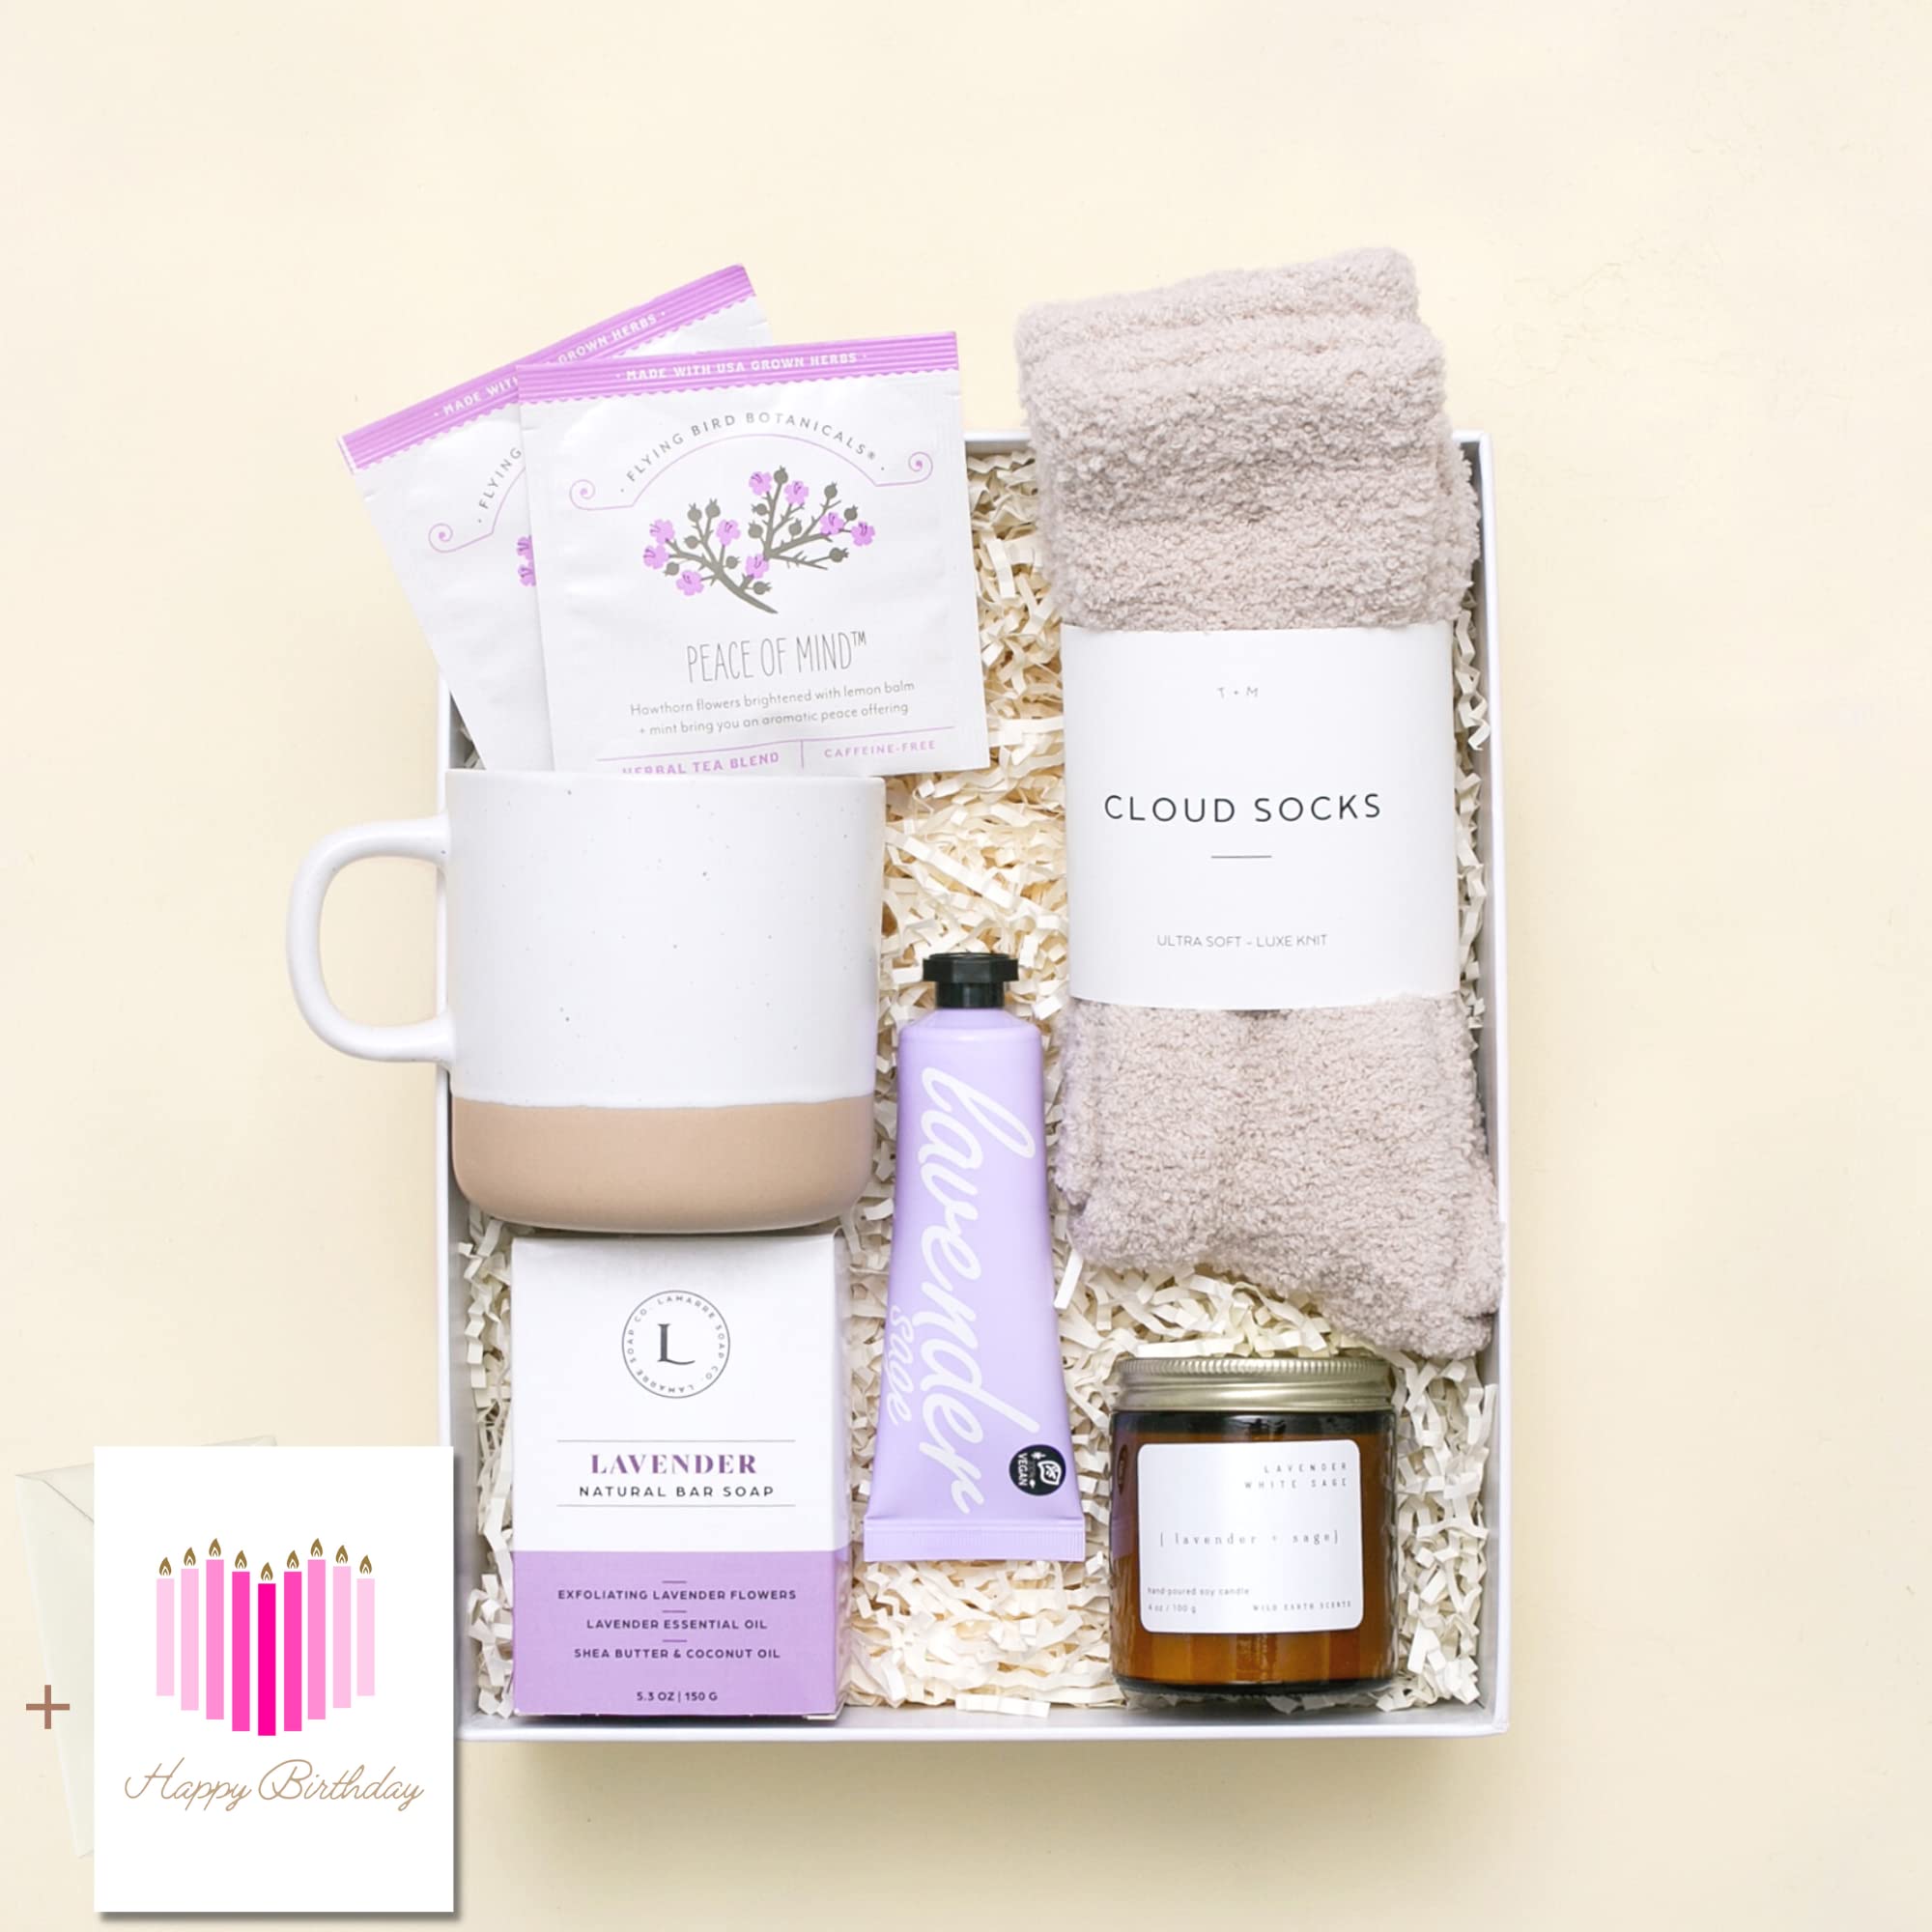 Care package for women, spa gift box, thinking of you care package,  lavender candle gift, self care gift, relaxation gifts for women